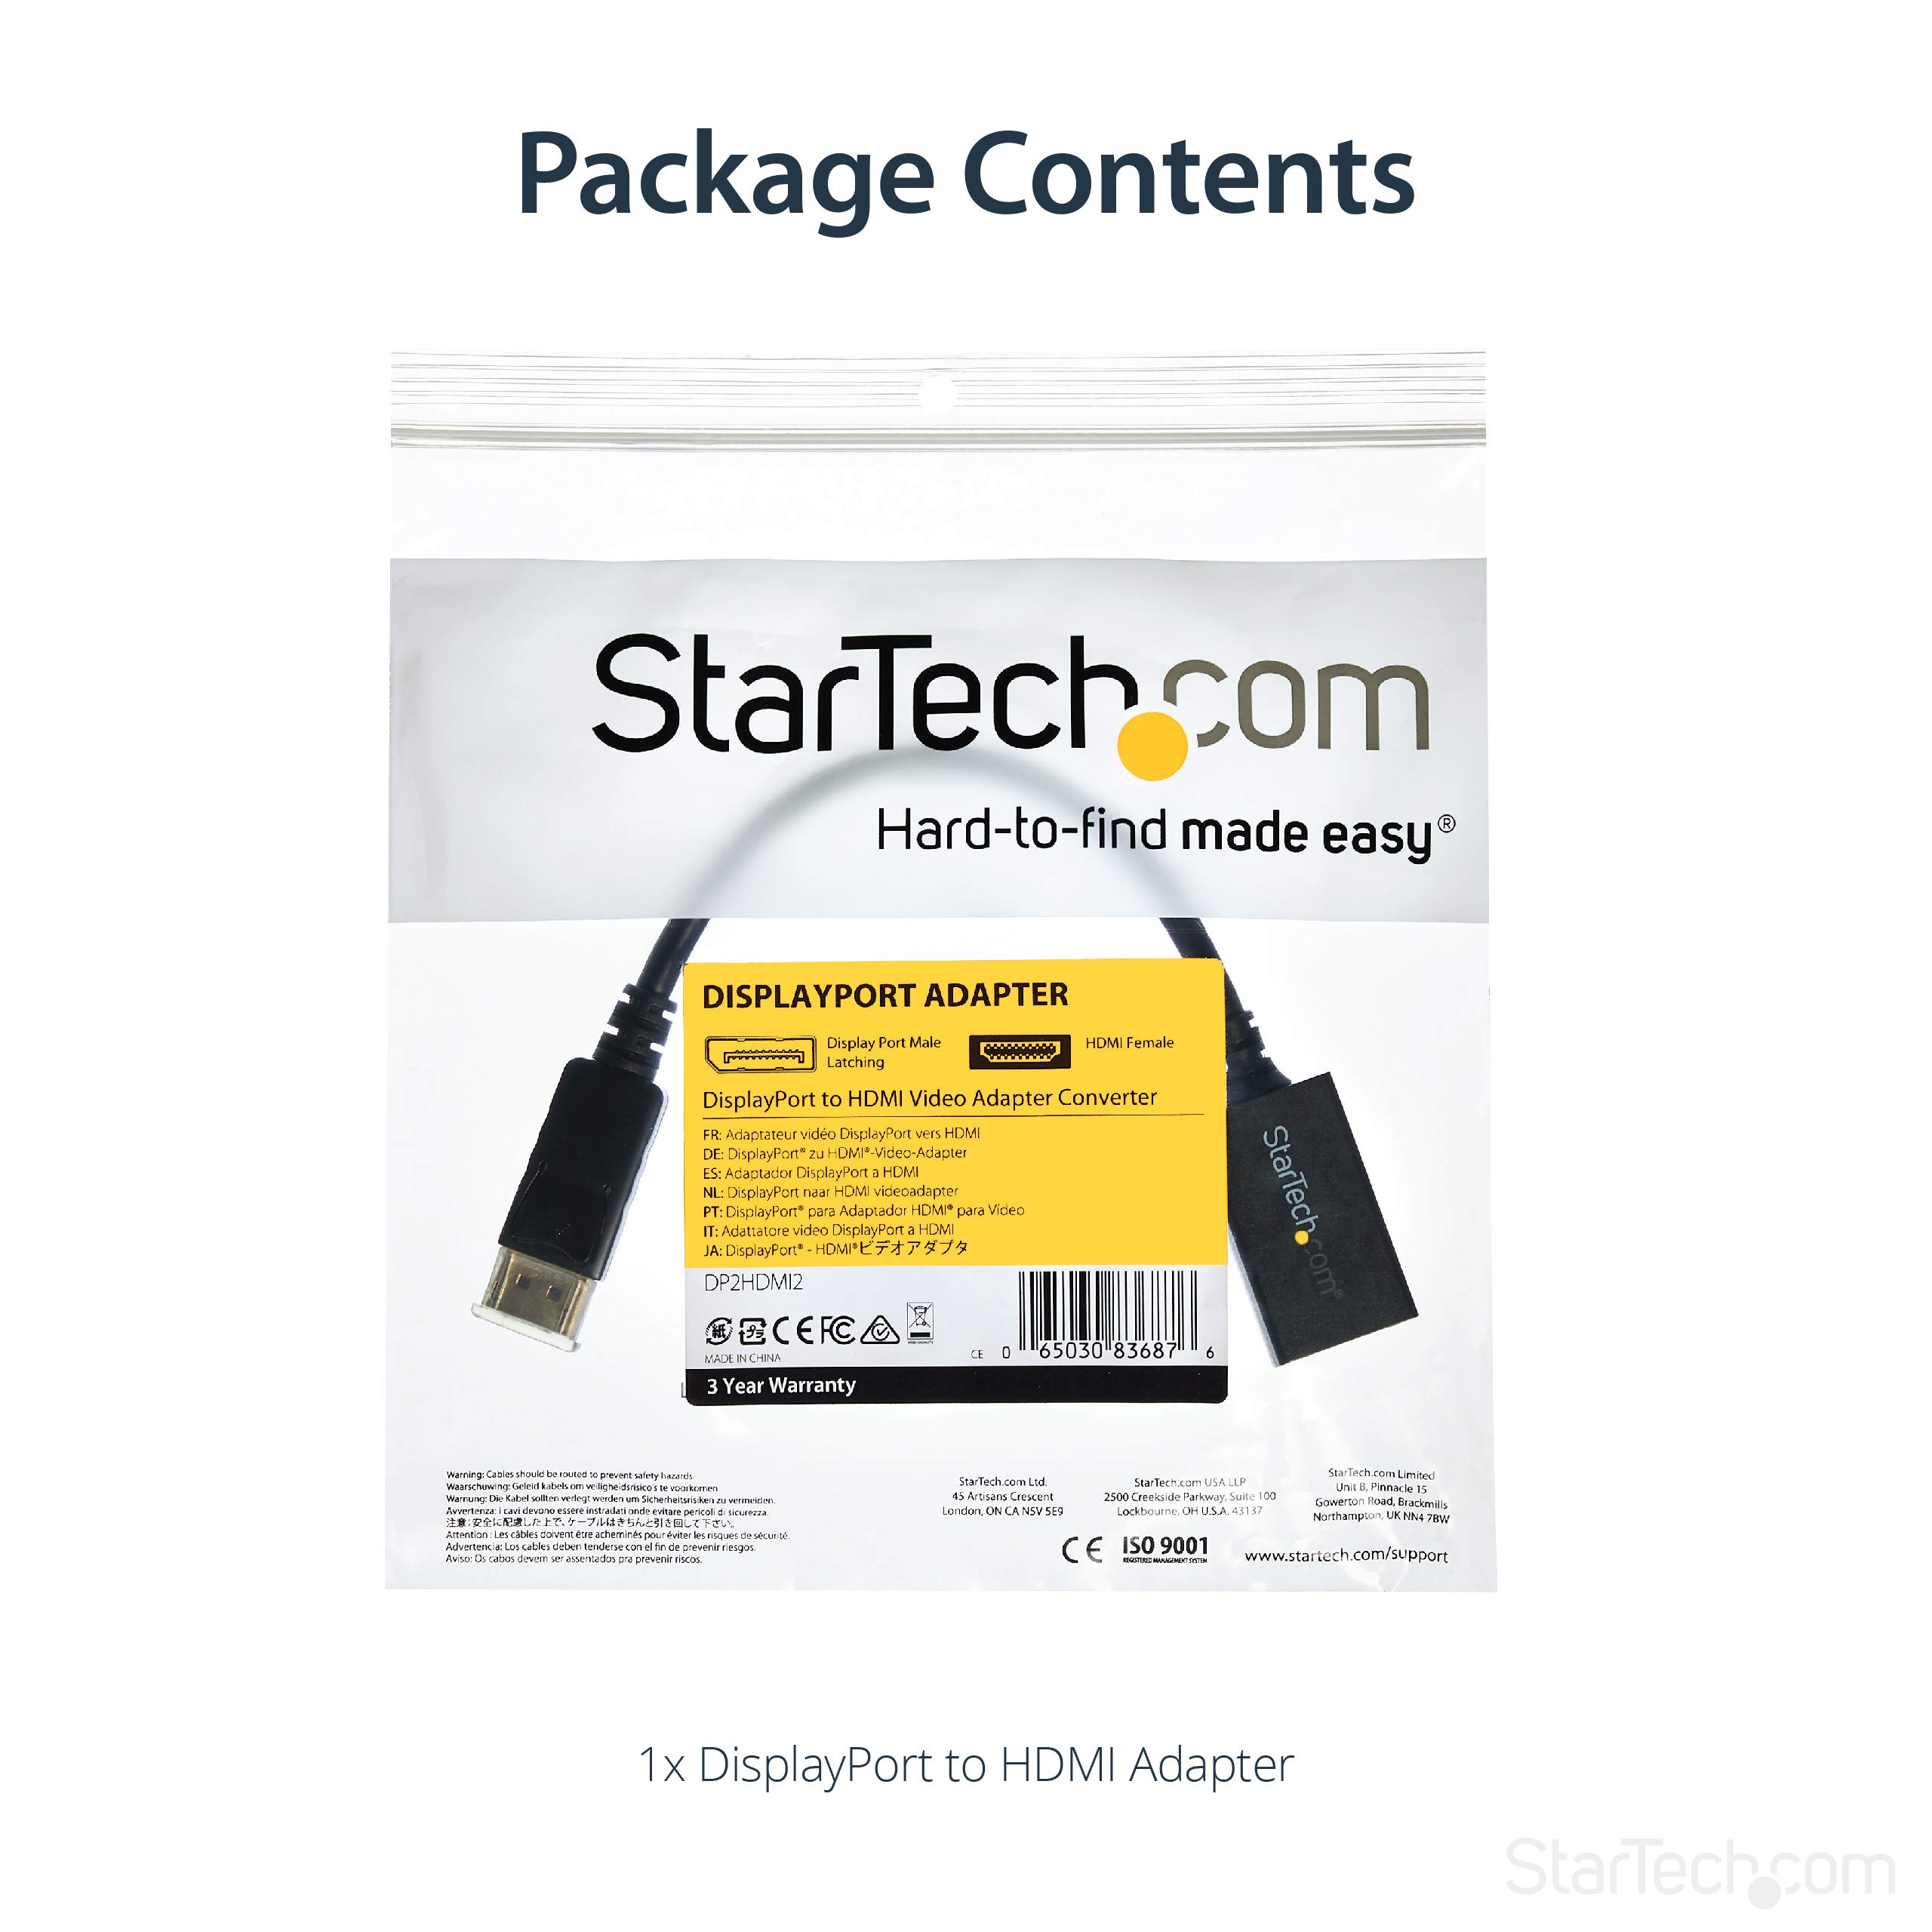 StarTech.com DisplayPort to HDMI Adapter - DP 1.2 to HDMI Video Converter 1080p - DP to HDMI Monitor/TV/Display Cable Adapter Dongle - Passive DP to HDMI Adapter - Latching DP Connector (DP2HDMI2)